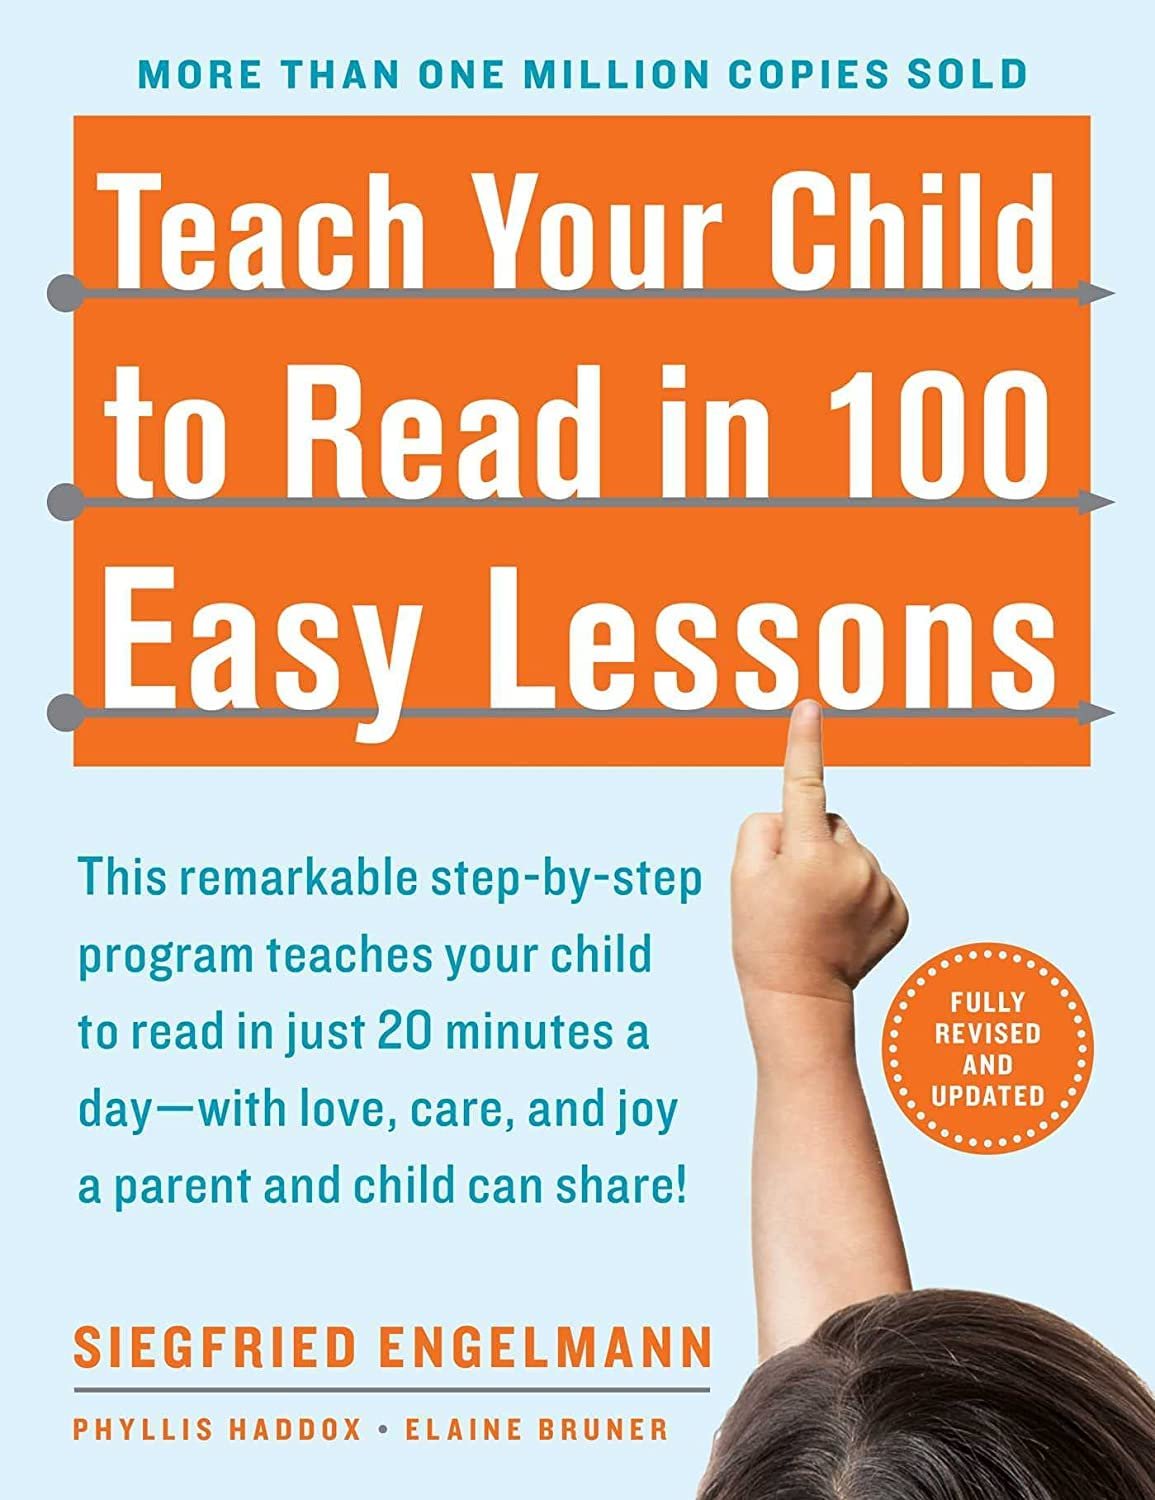 Teach Your Child to Read in 100 Easy Lessons.jpg